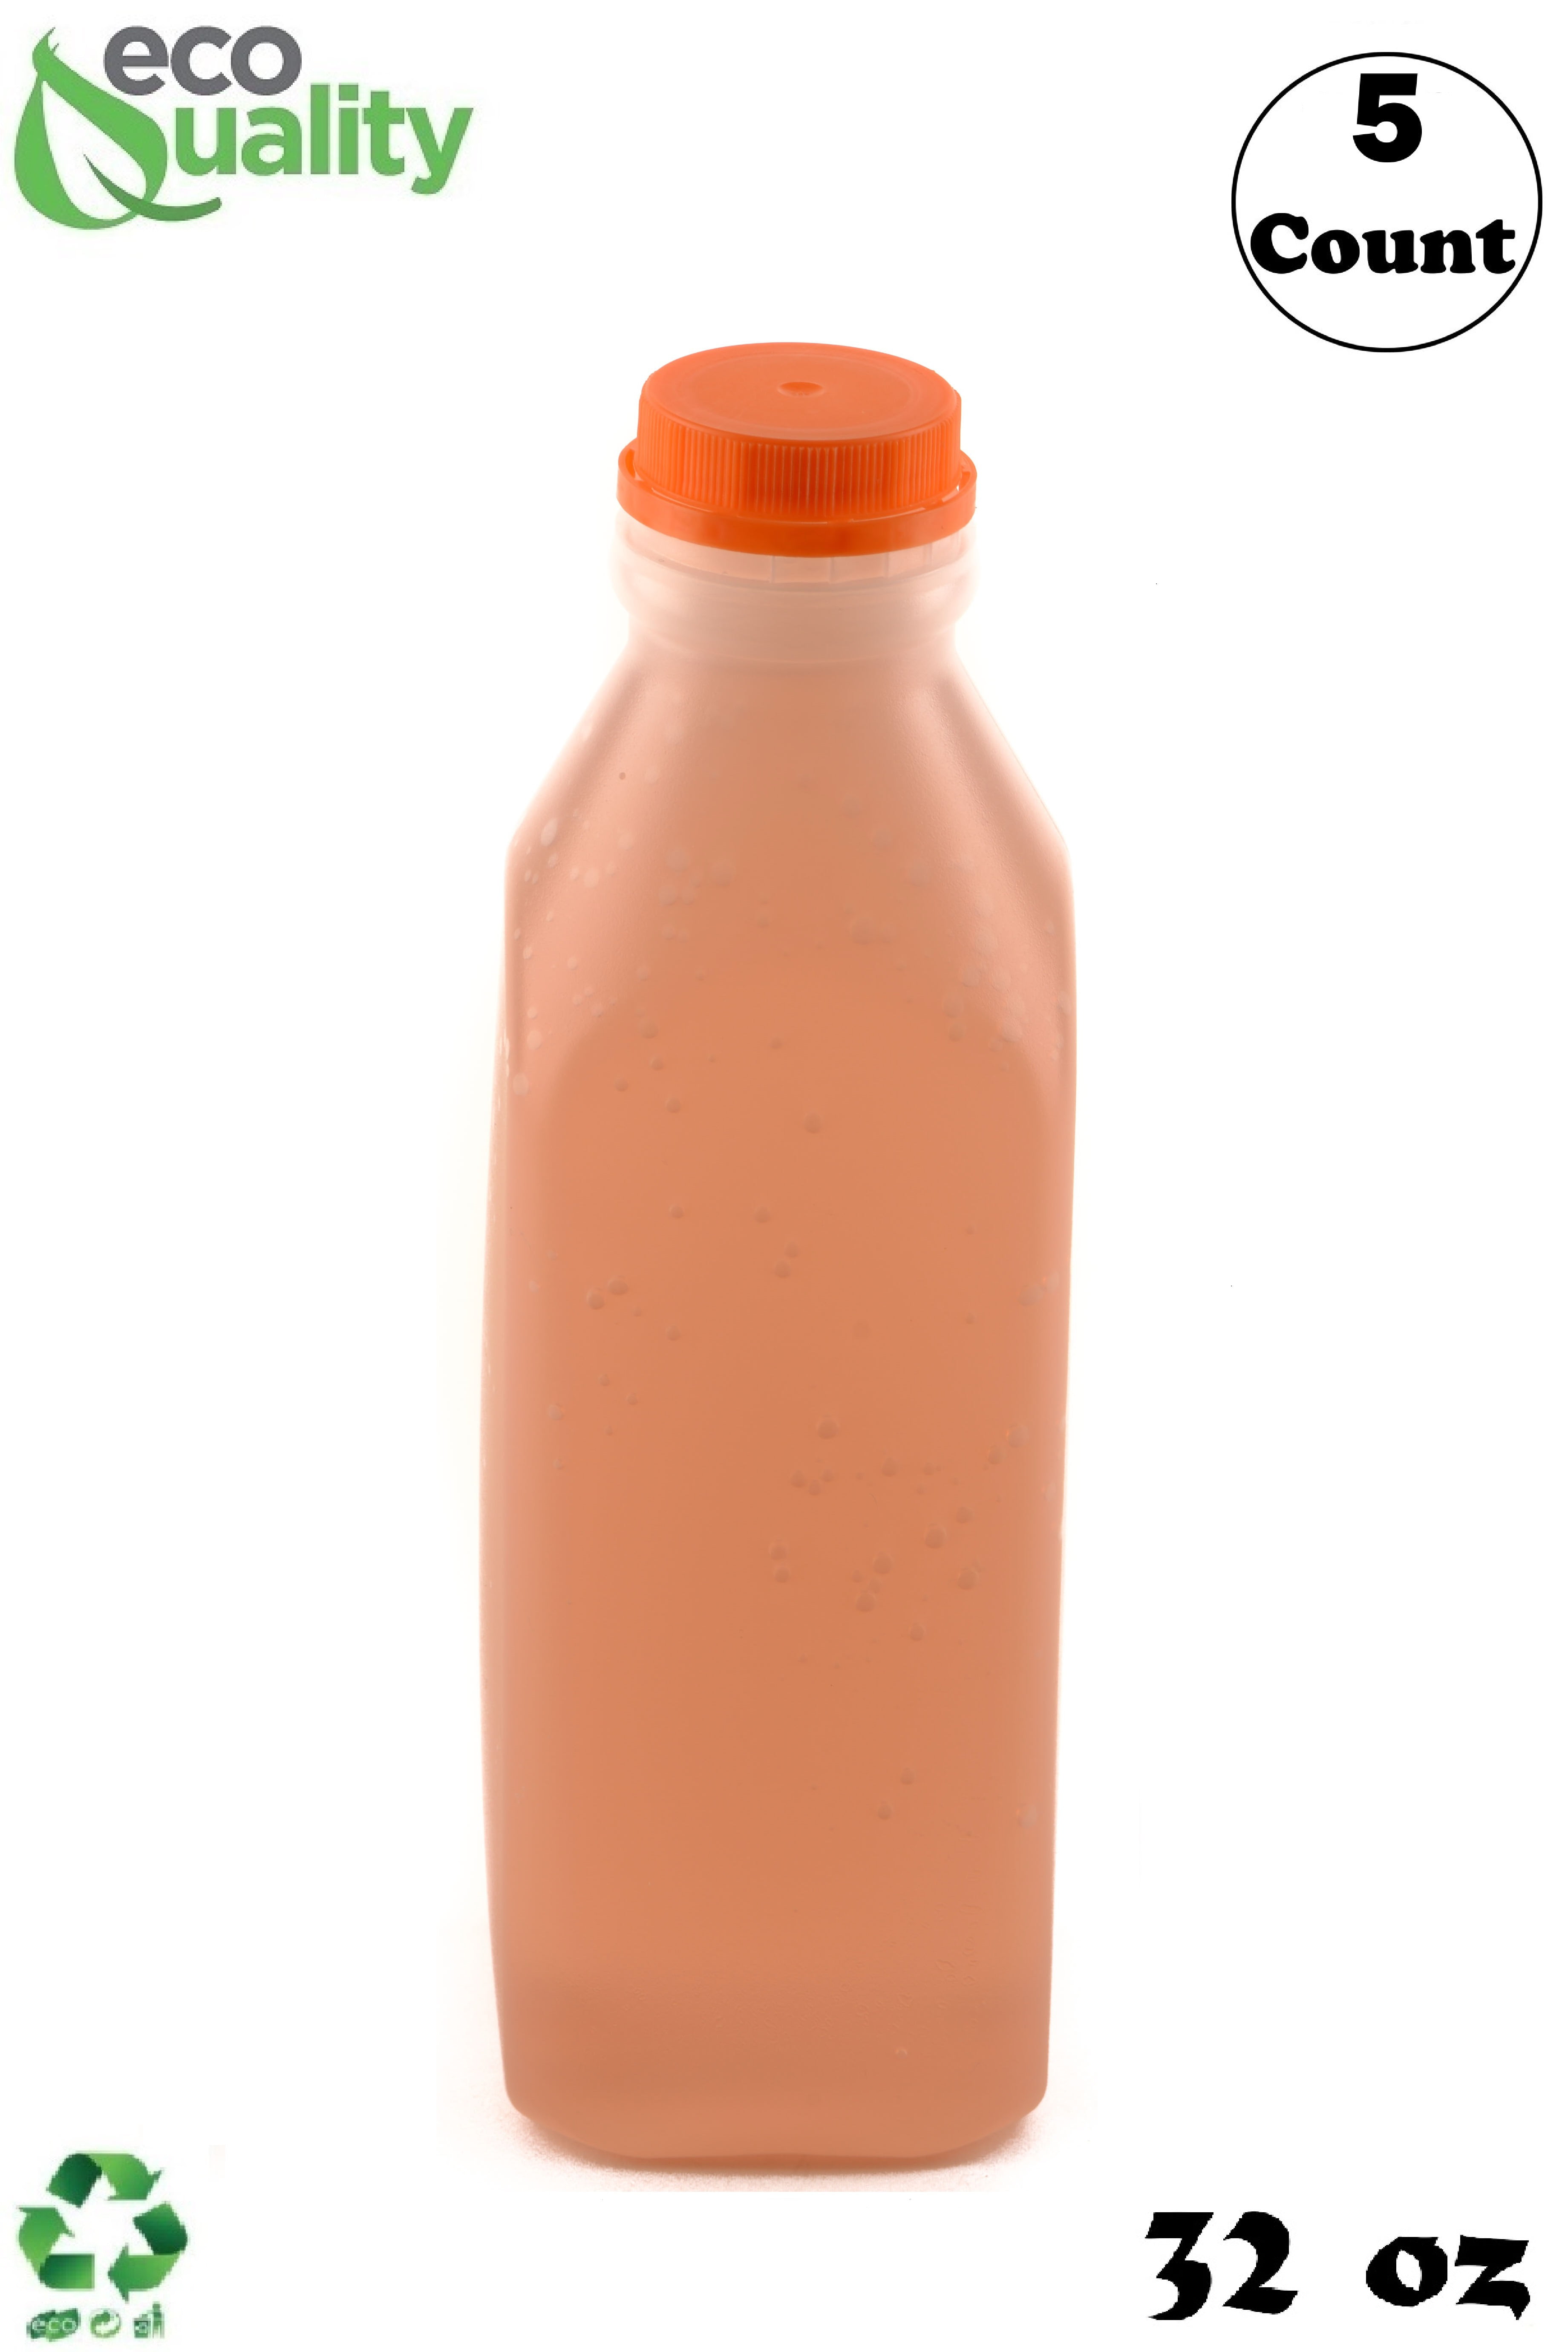 [30 Pack] 64 oz Empty Plastic Juice Bottles with Tamper Evident Caps - Half Gallon, Smoothie Bottles Ideal for Juices, Milk, Smoothies, Picnic's 